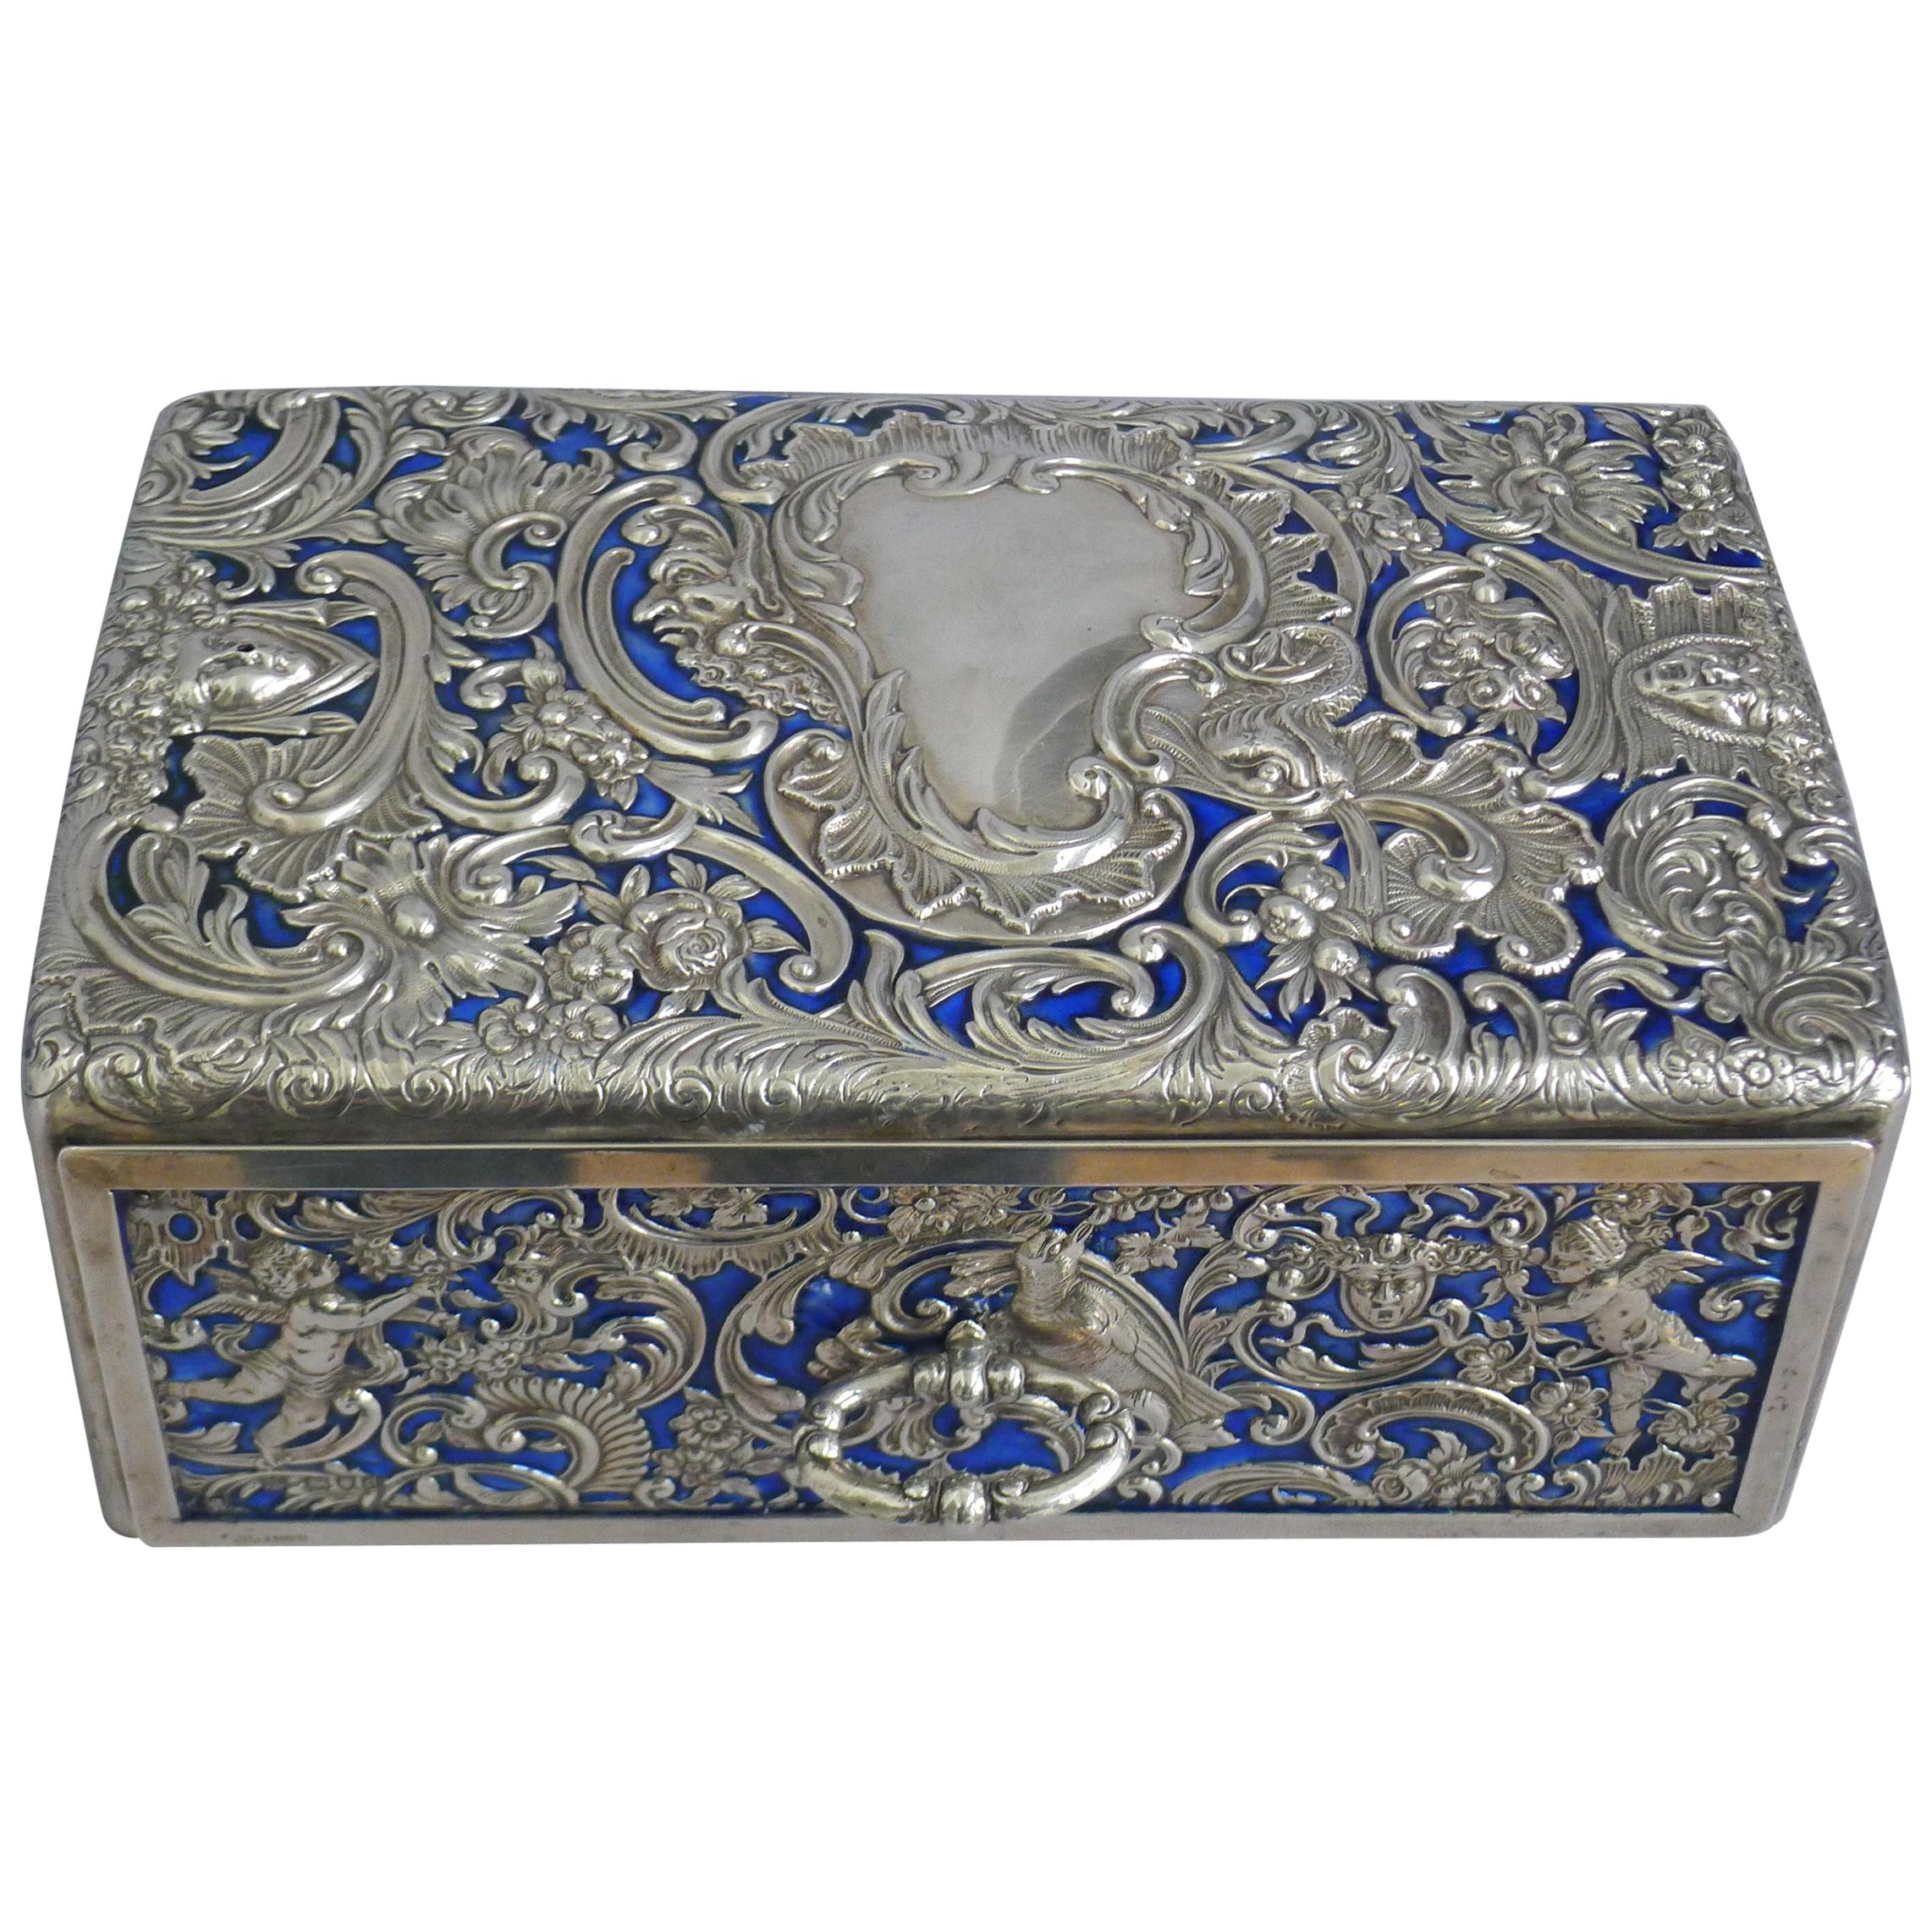 Superb English Silver and Enamel Casket by William Comyns